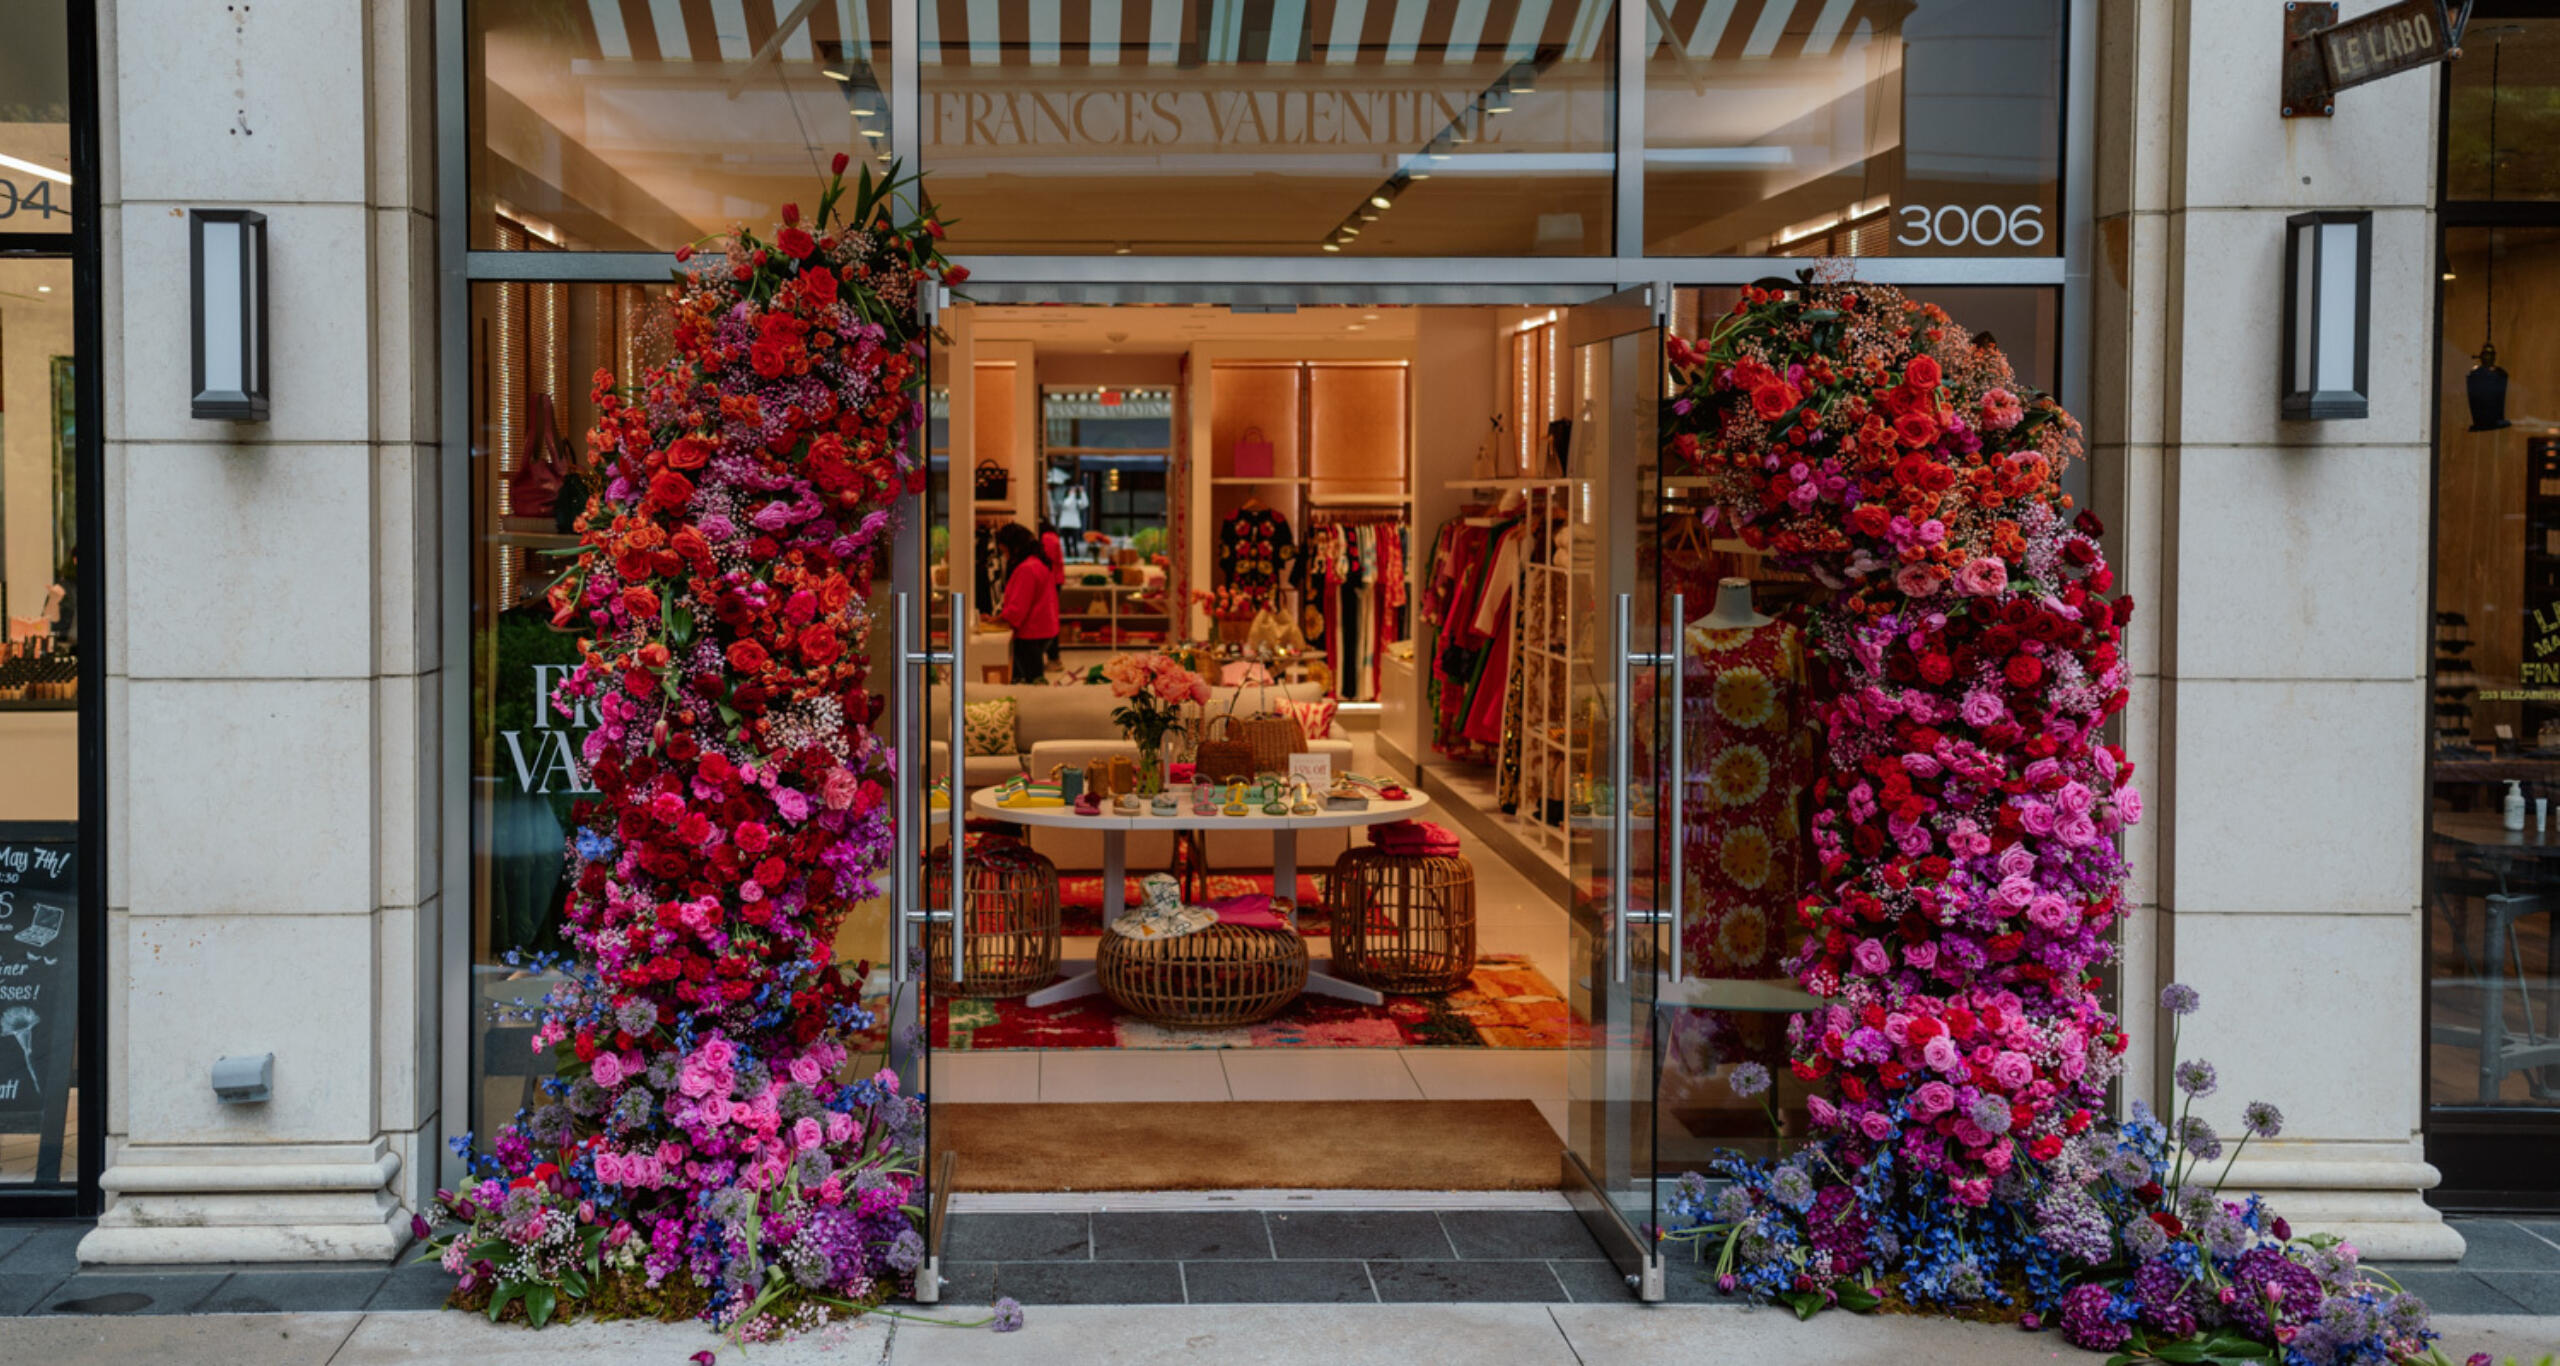 Storefront at Buckhead Village decorated with flowers for Bodacious Blooms festival